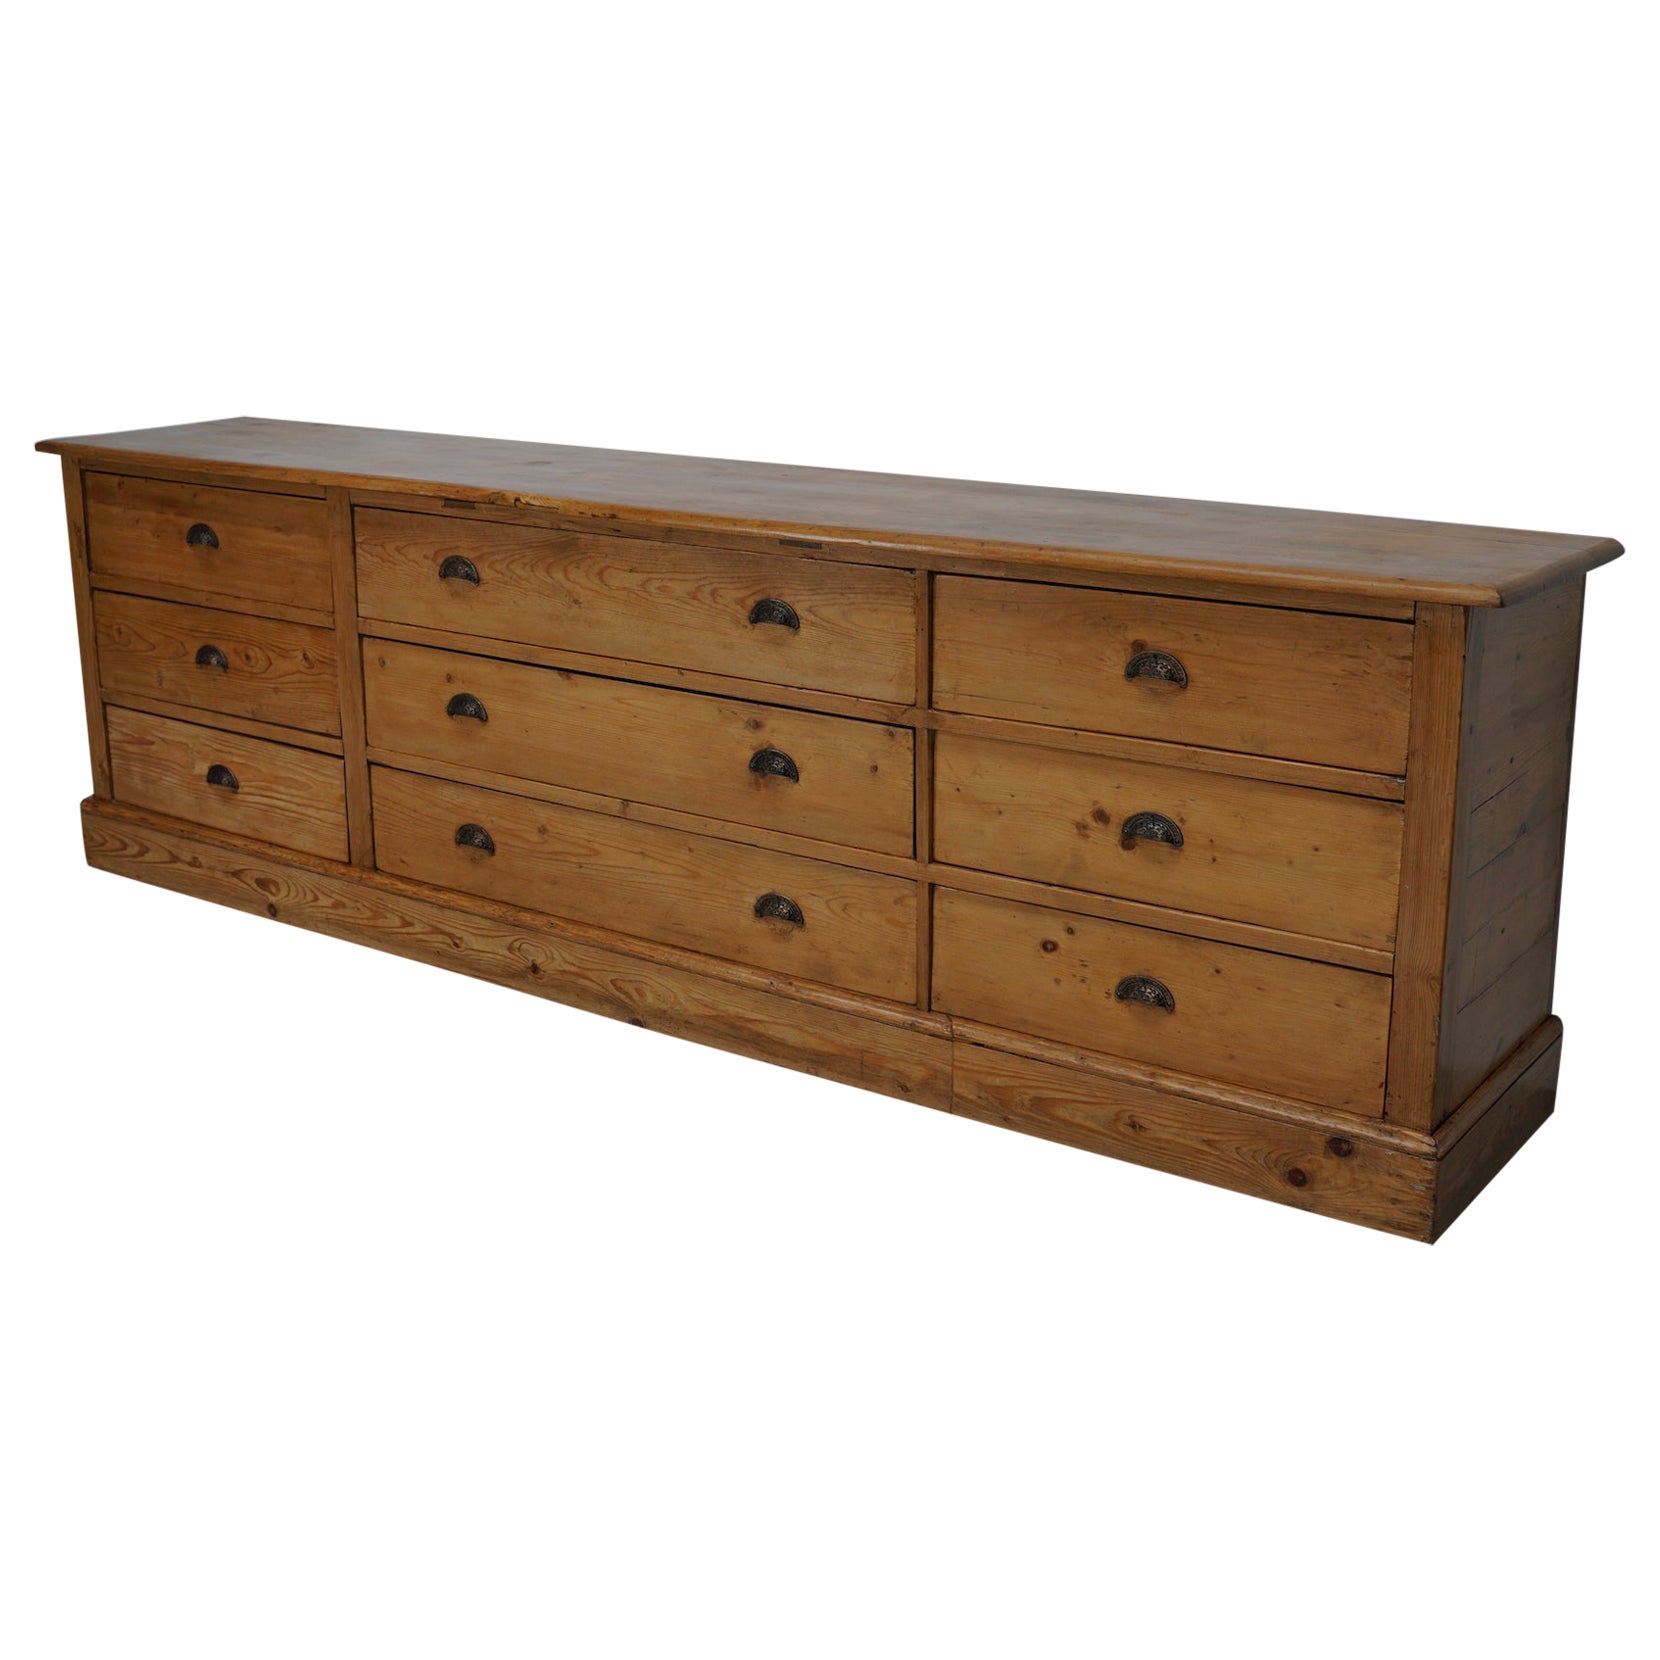 Large German Pine Apothecary Cabinet / Bank of Drawers, Early 20th Century For Sale